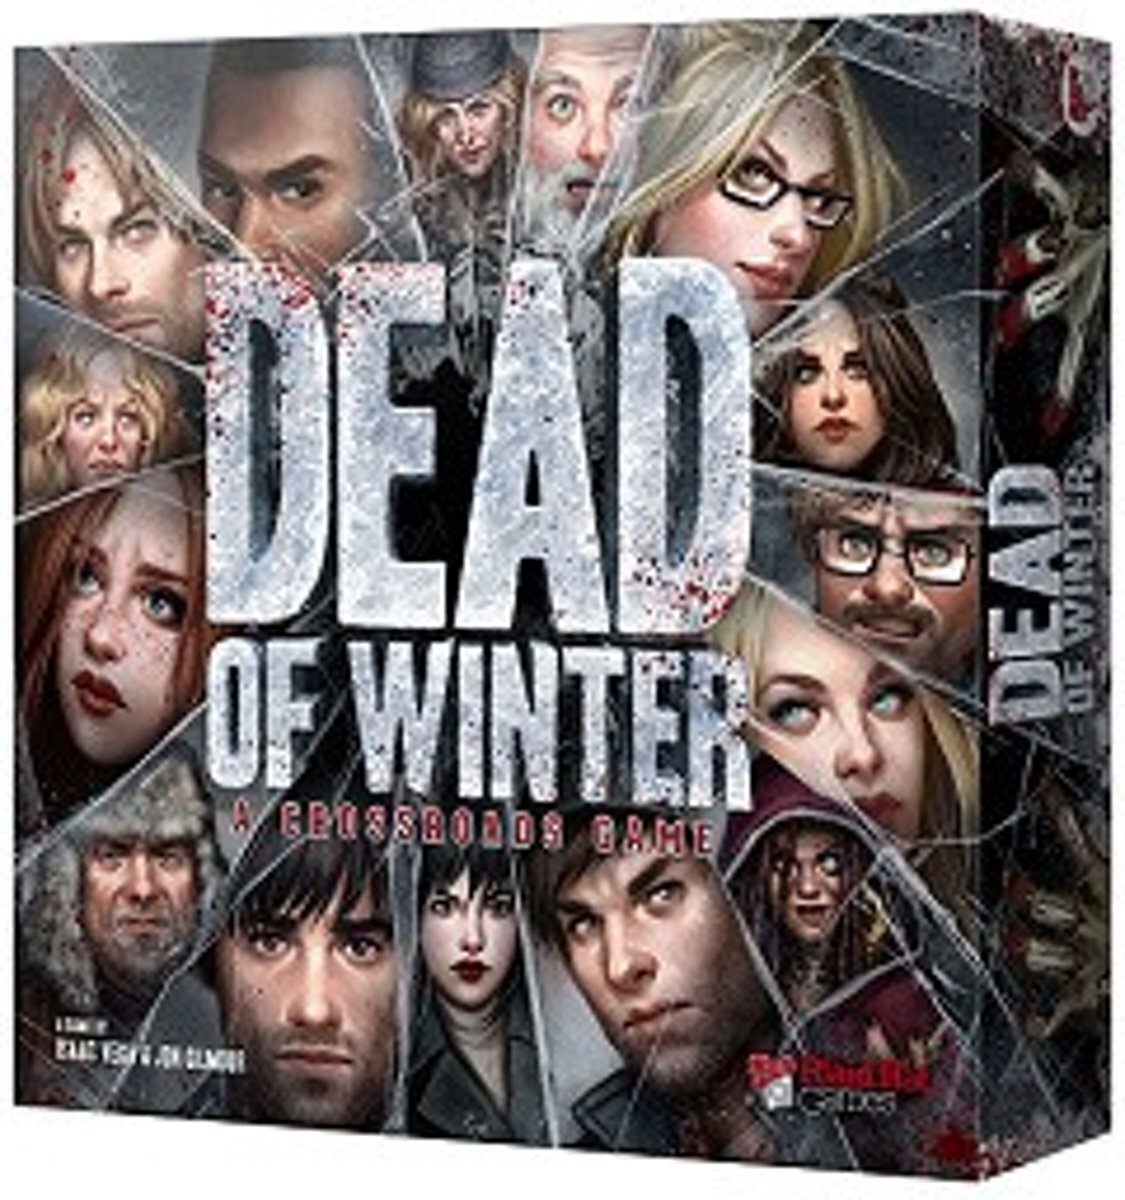 Plaid Hat Games Dead of Winter A Crossroads Game